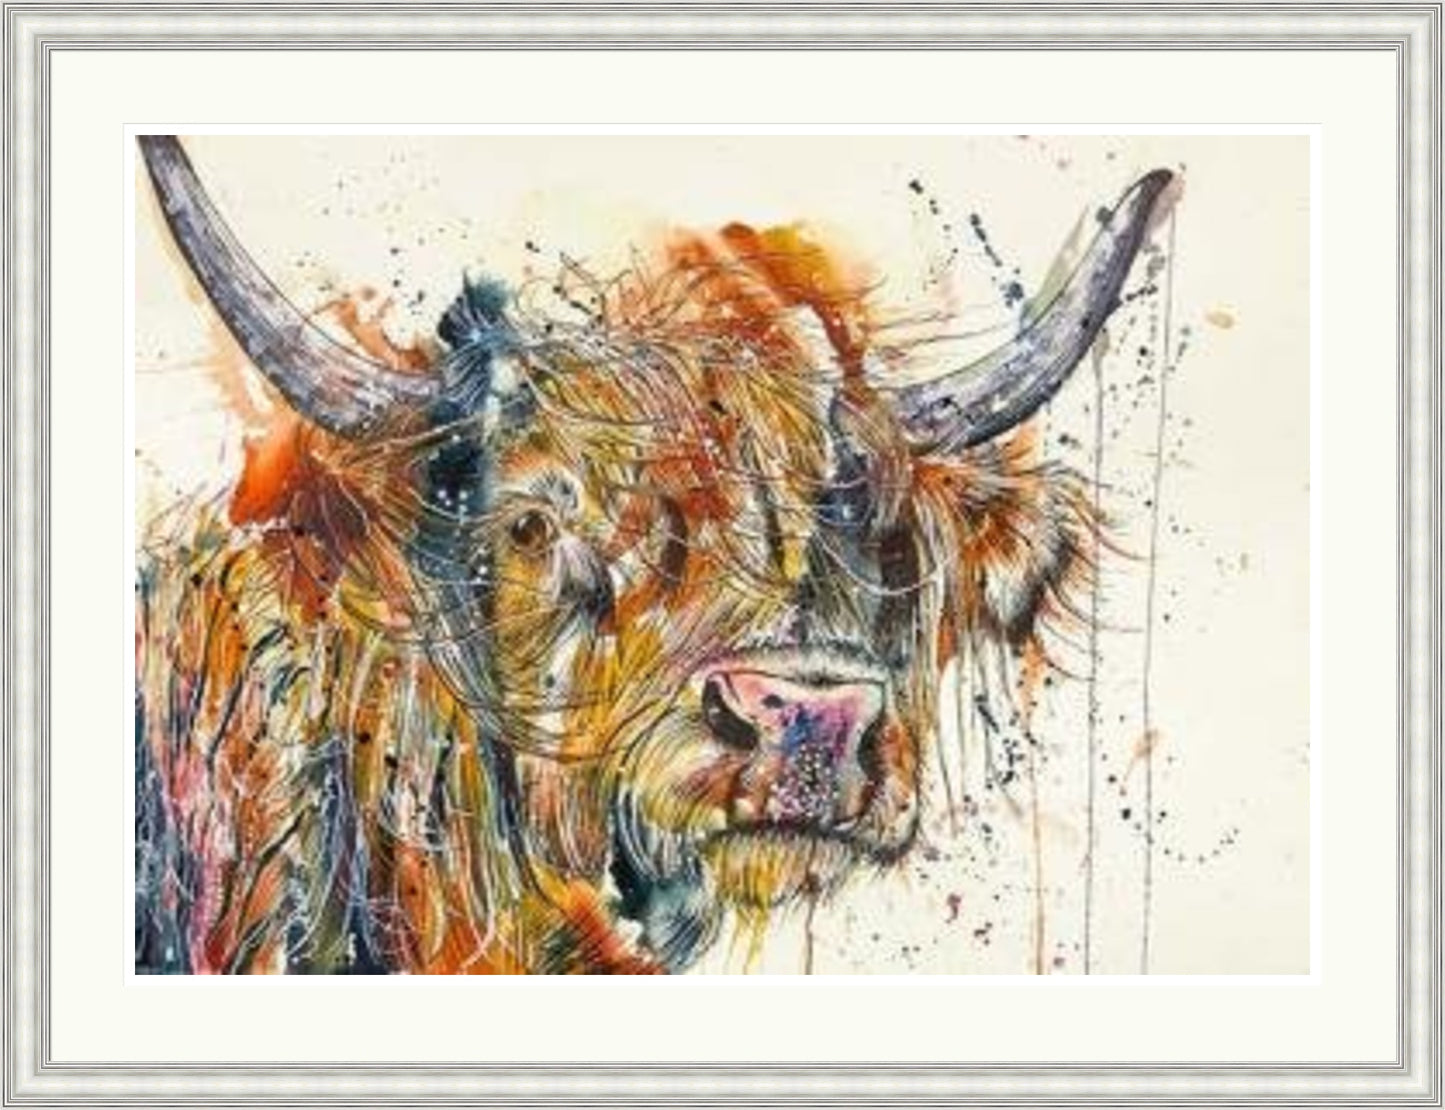 Gone with the Wind Highland Cow Art Print by Tori Ratcliffe